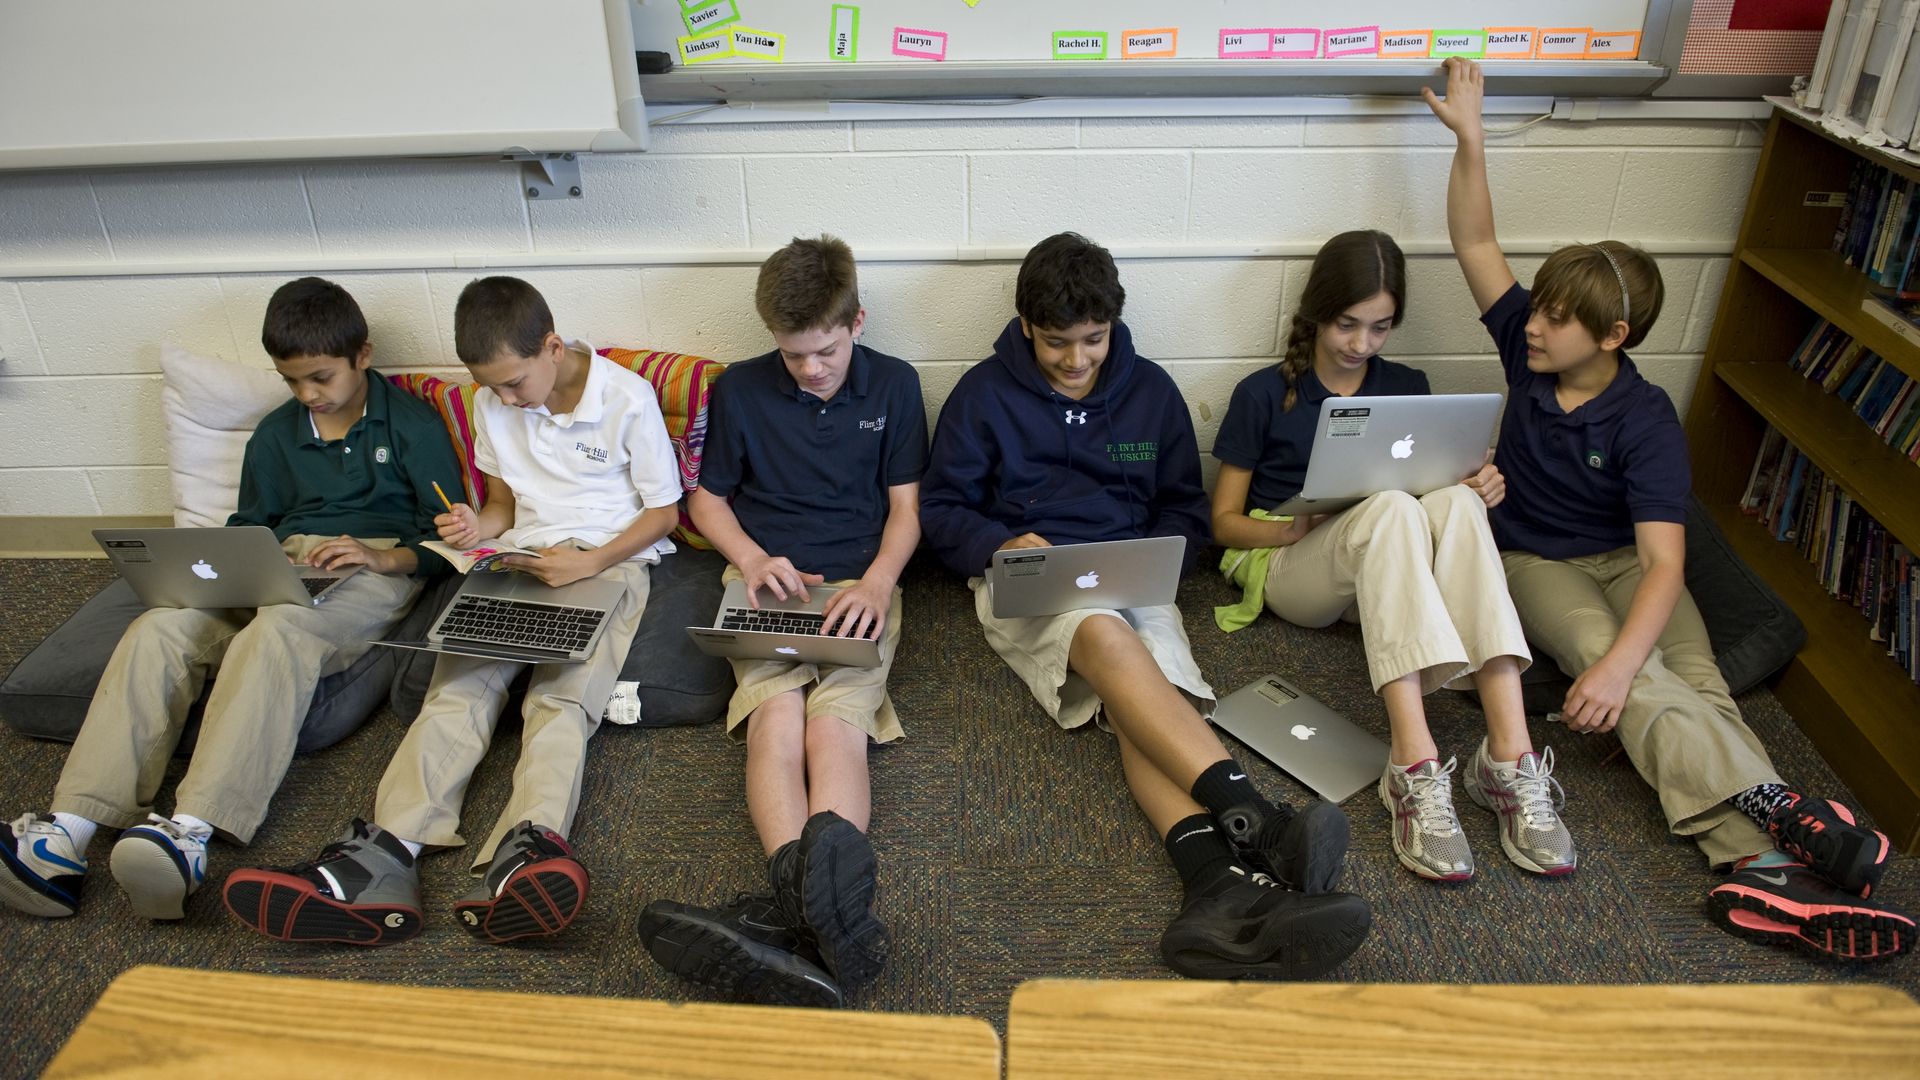 Sixth grade students sit against a wall and work on laptops